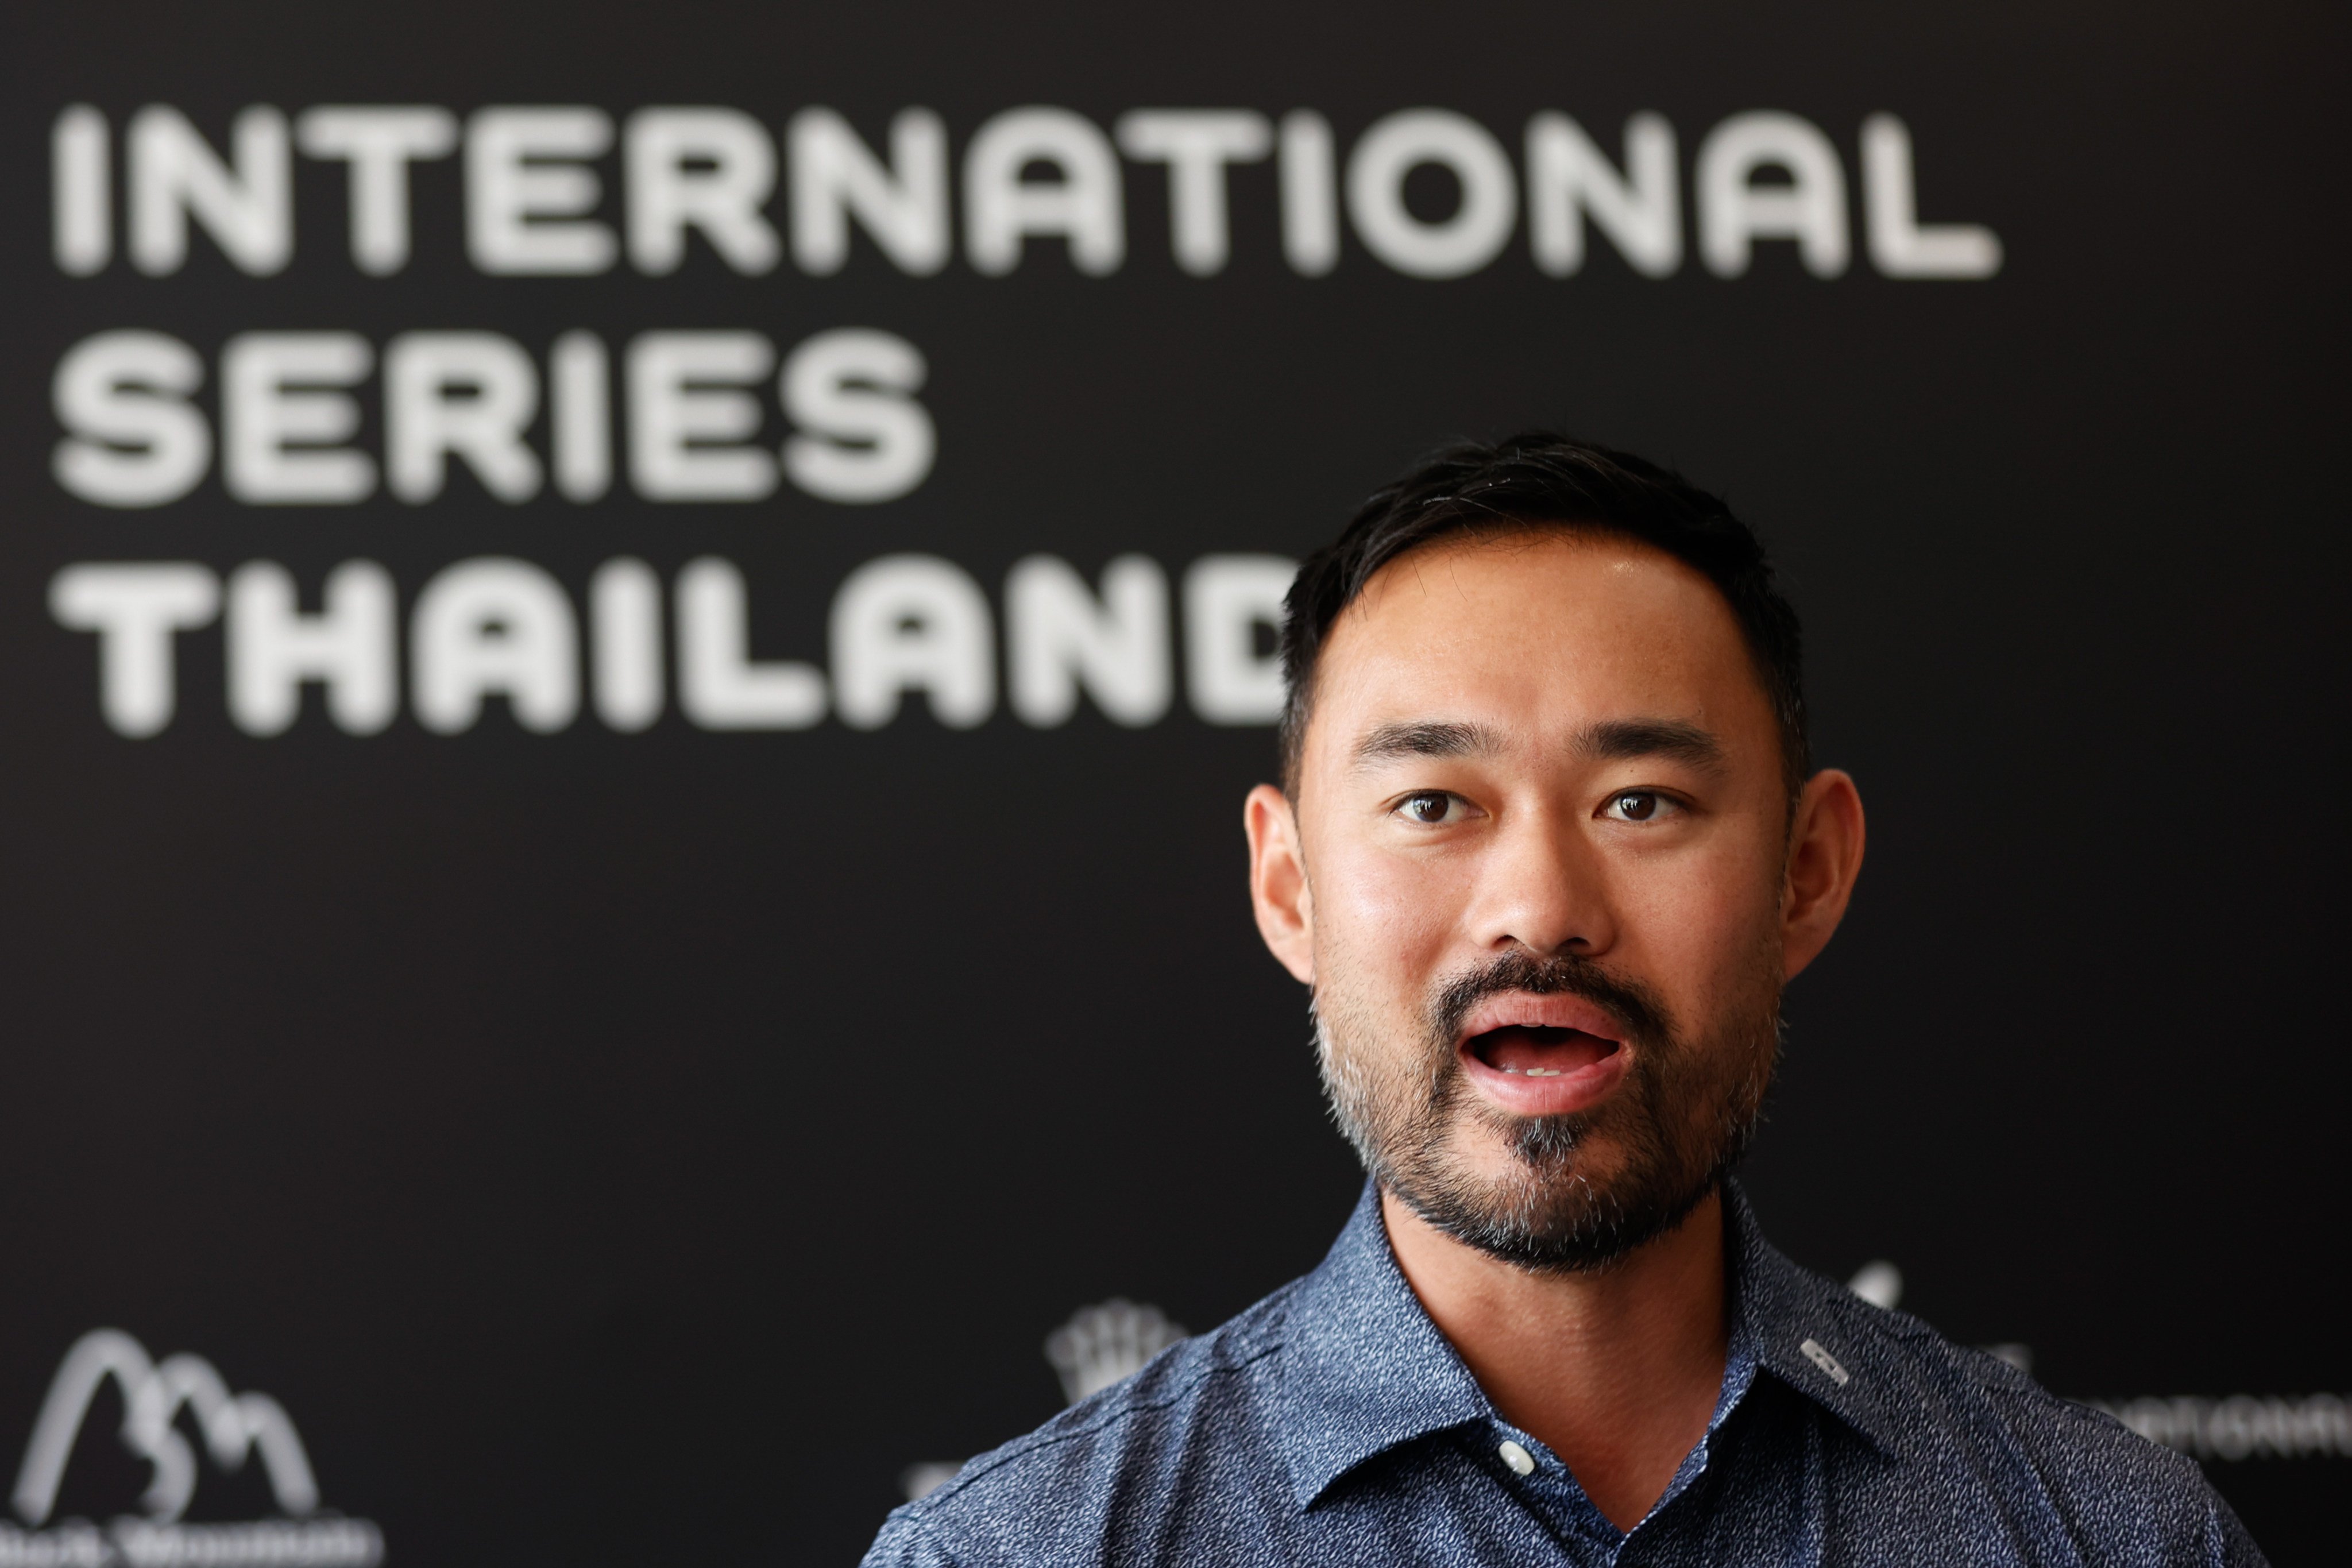 Asian Tour commissioner and CEO Cho Minn Thant speaks to the media at the International Series Thailand in March. Photo: Asian Tour.